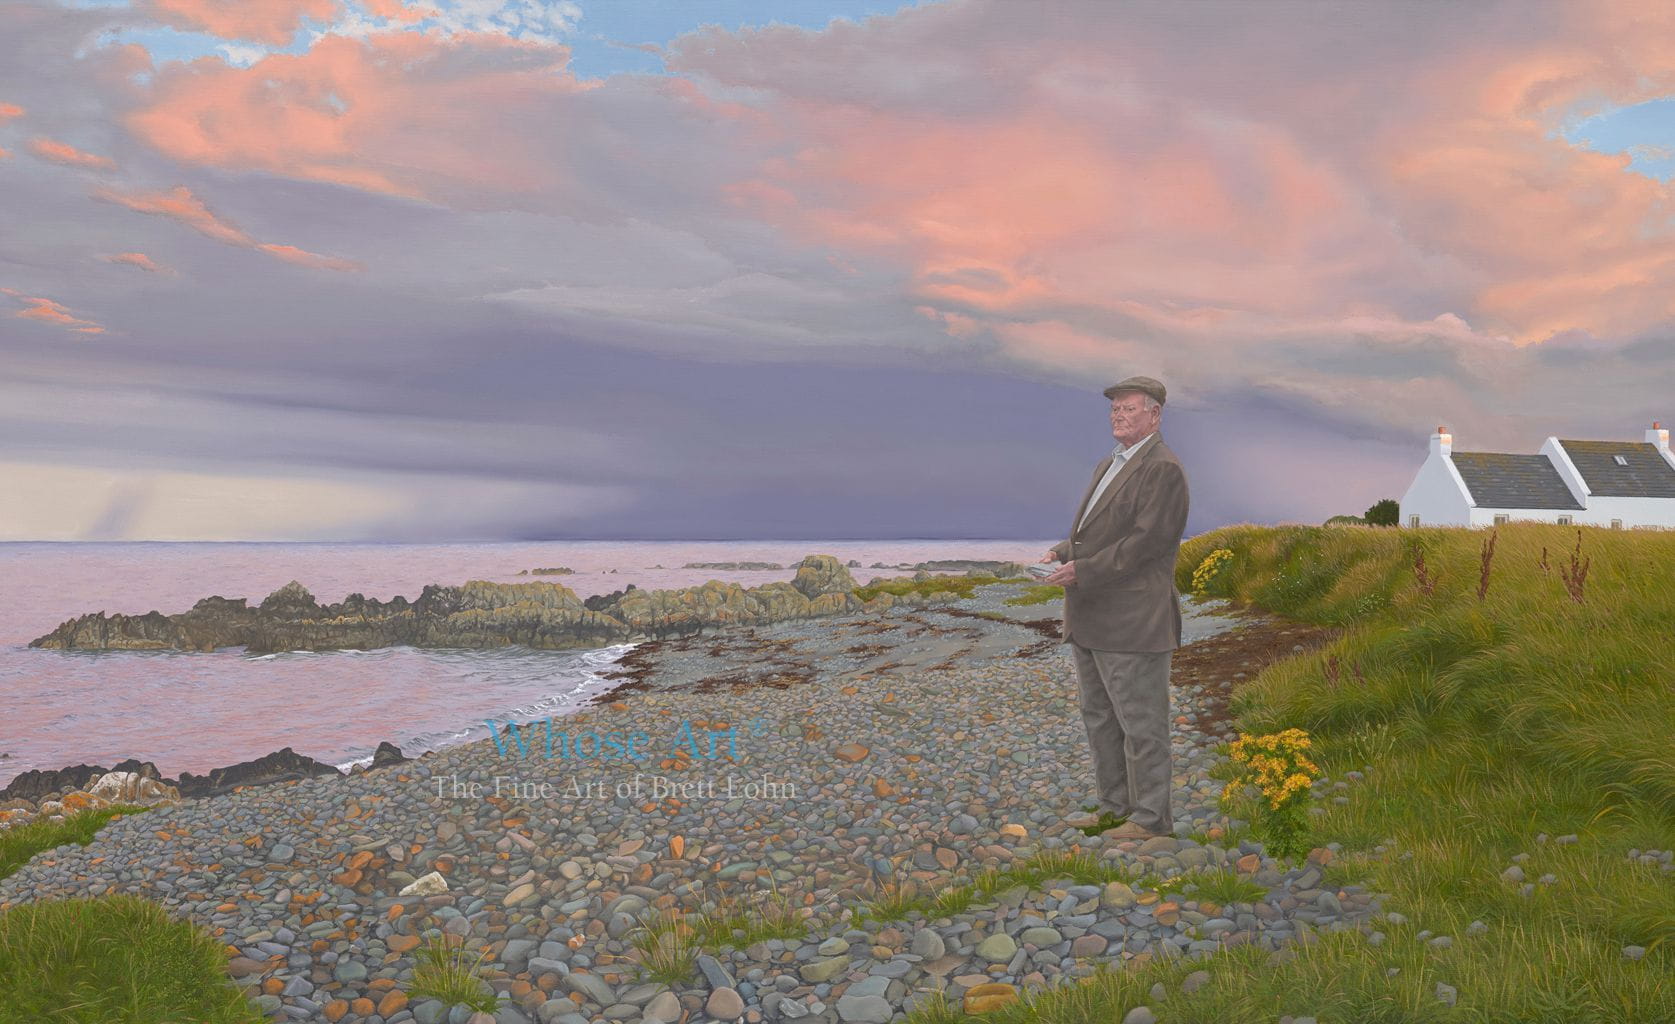 Art and wellbeing in a painting of a man standing on a beach with a stone in his hand. The sky is dark as the sun sets